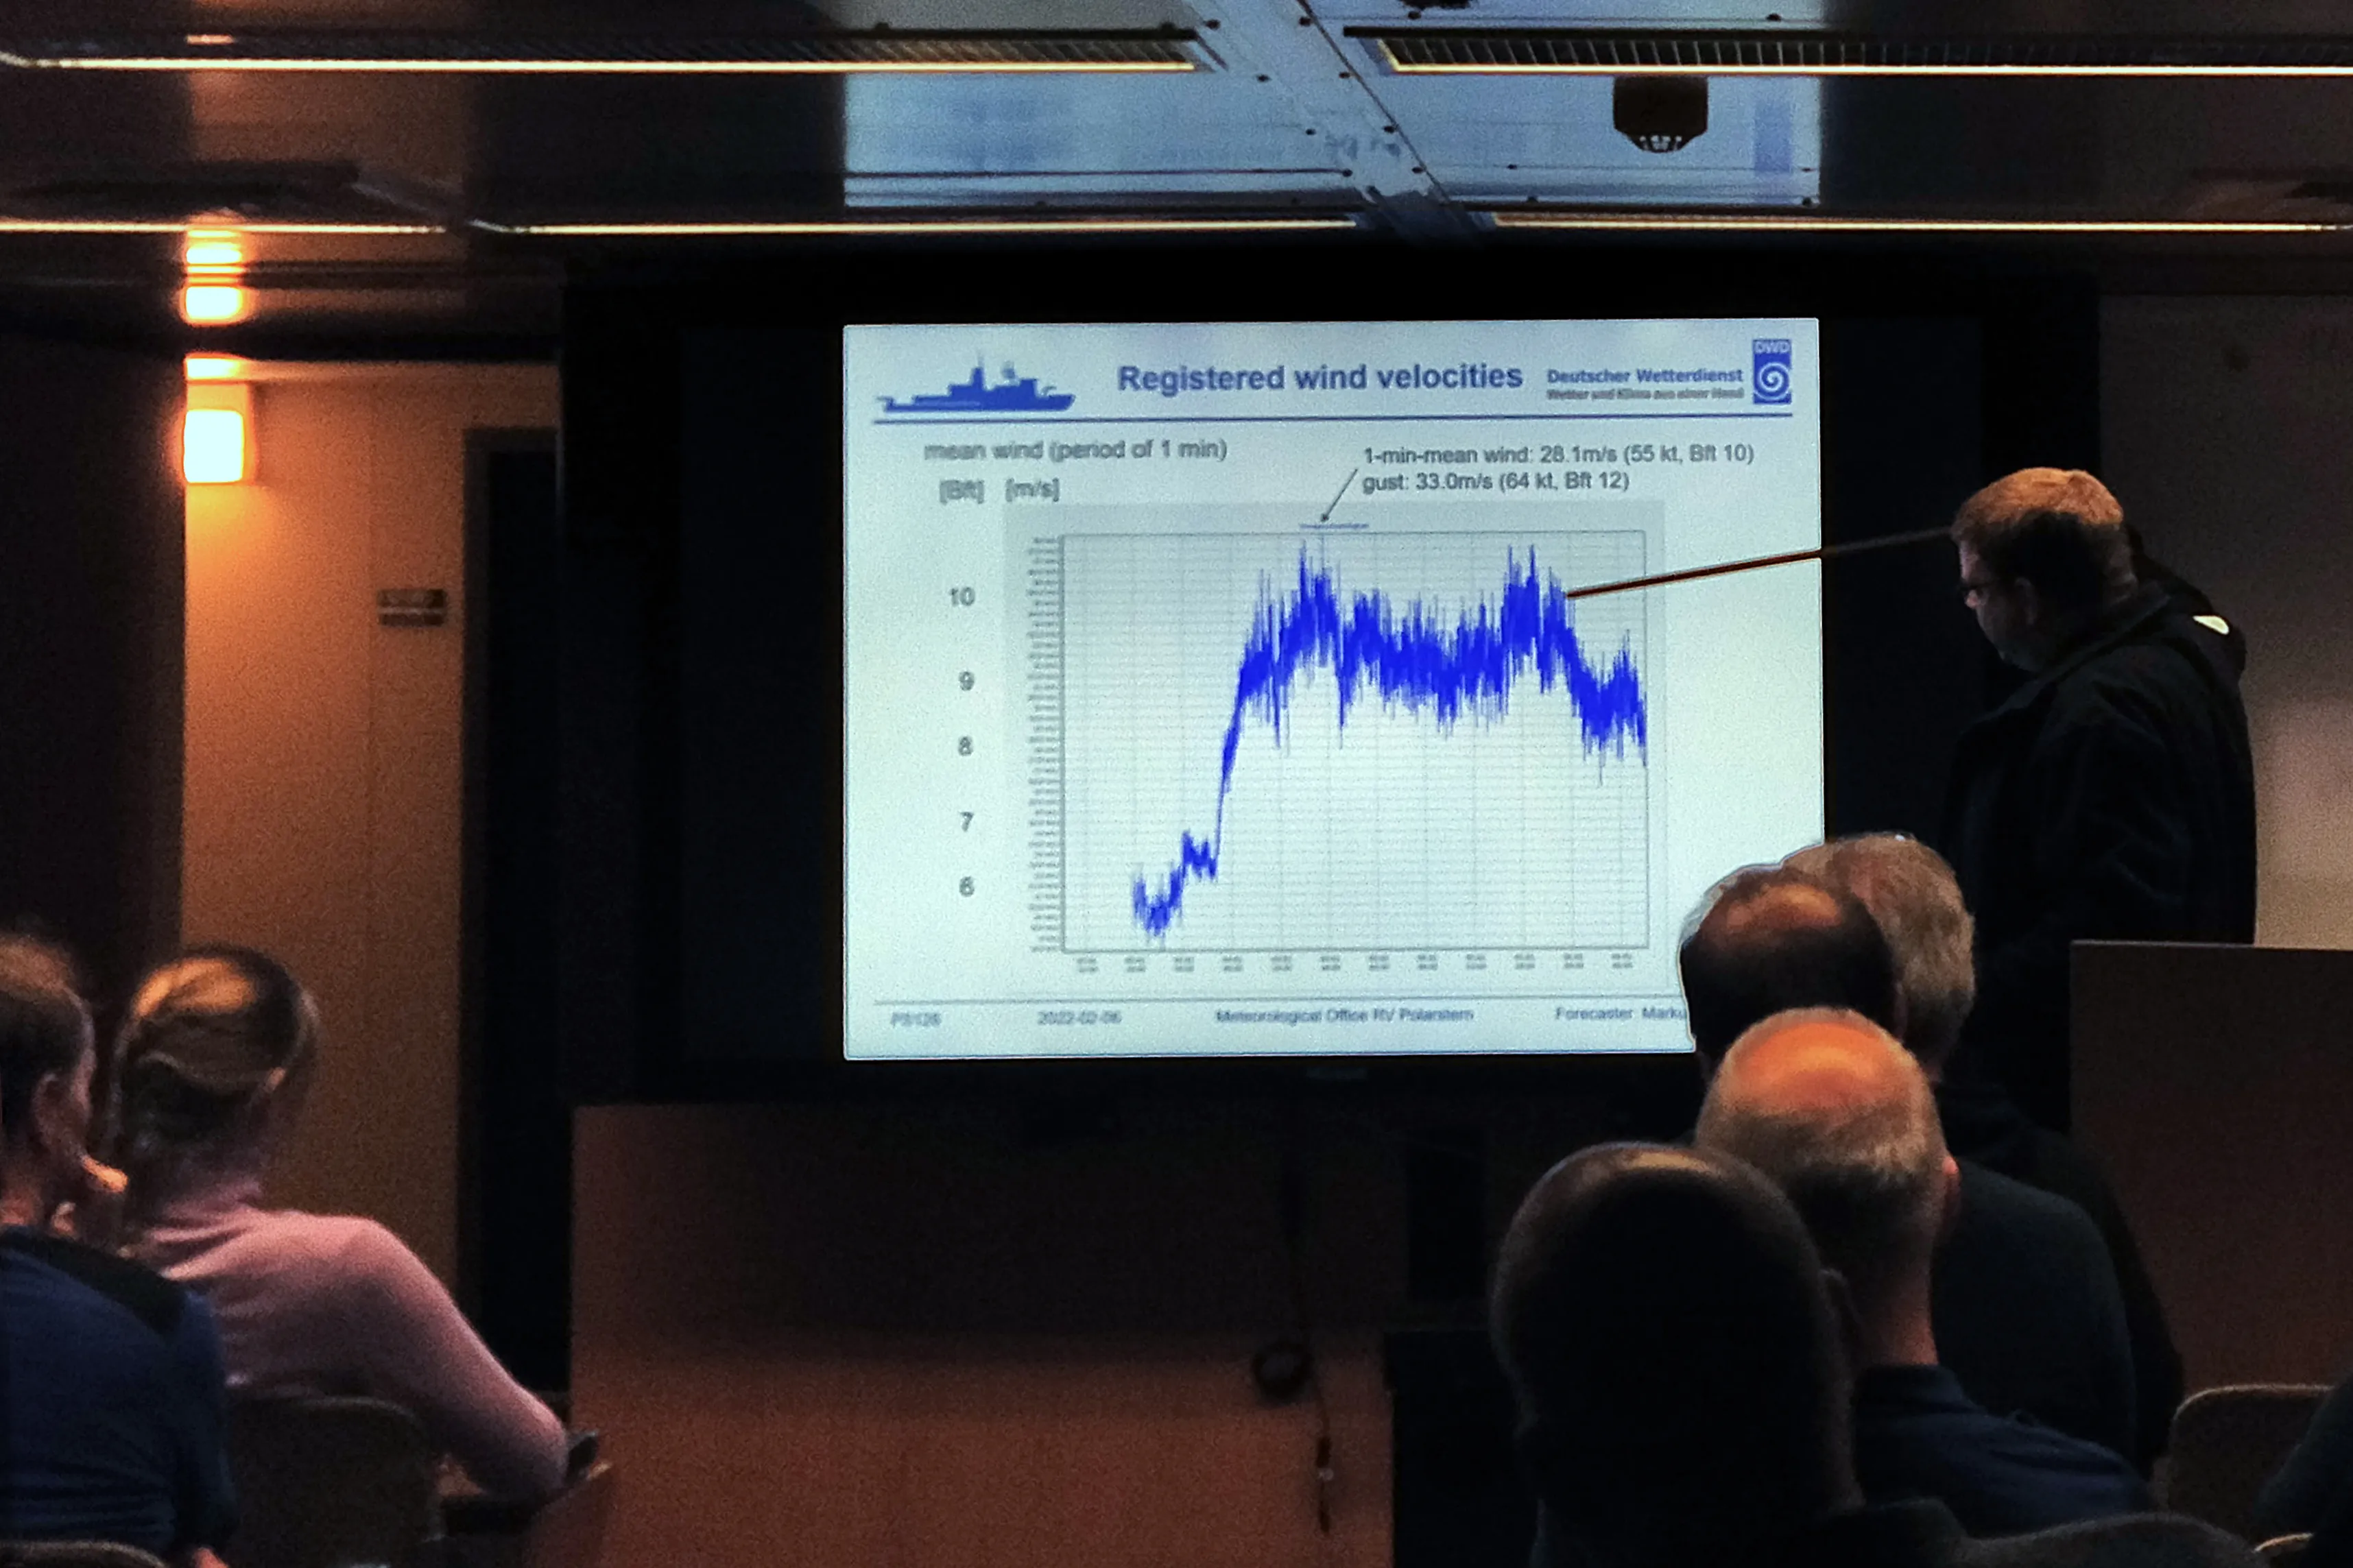 A presentation with a slide entitled 'Registered wind velocities' and a graph showing a sudden increase to high values and a slow decline. The presenter is pointing at the peak of the line.